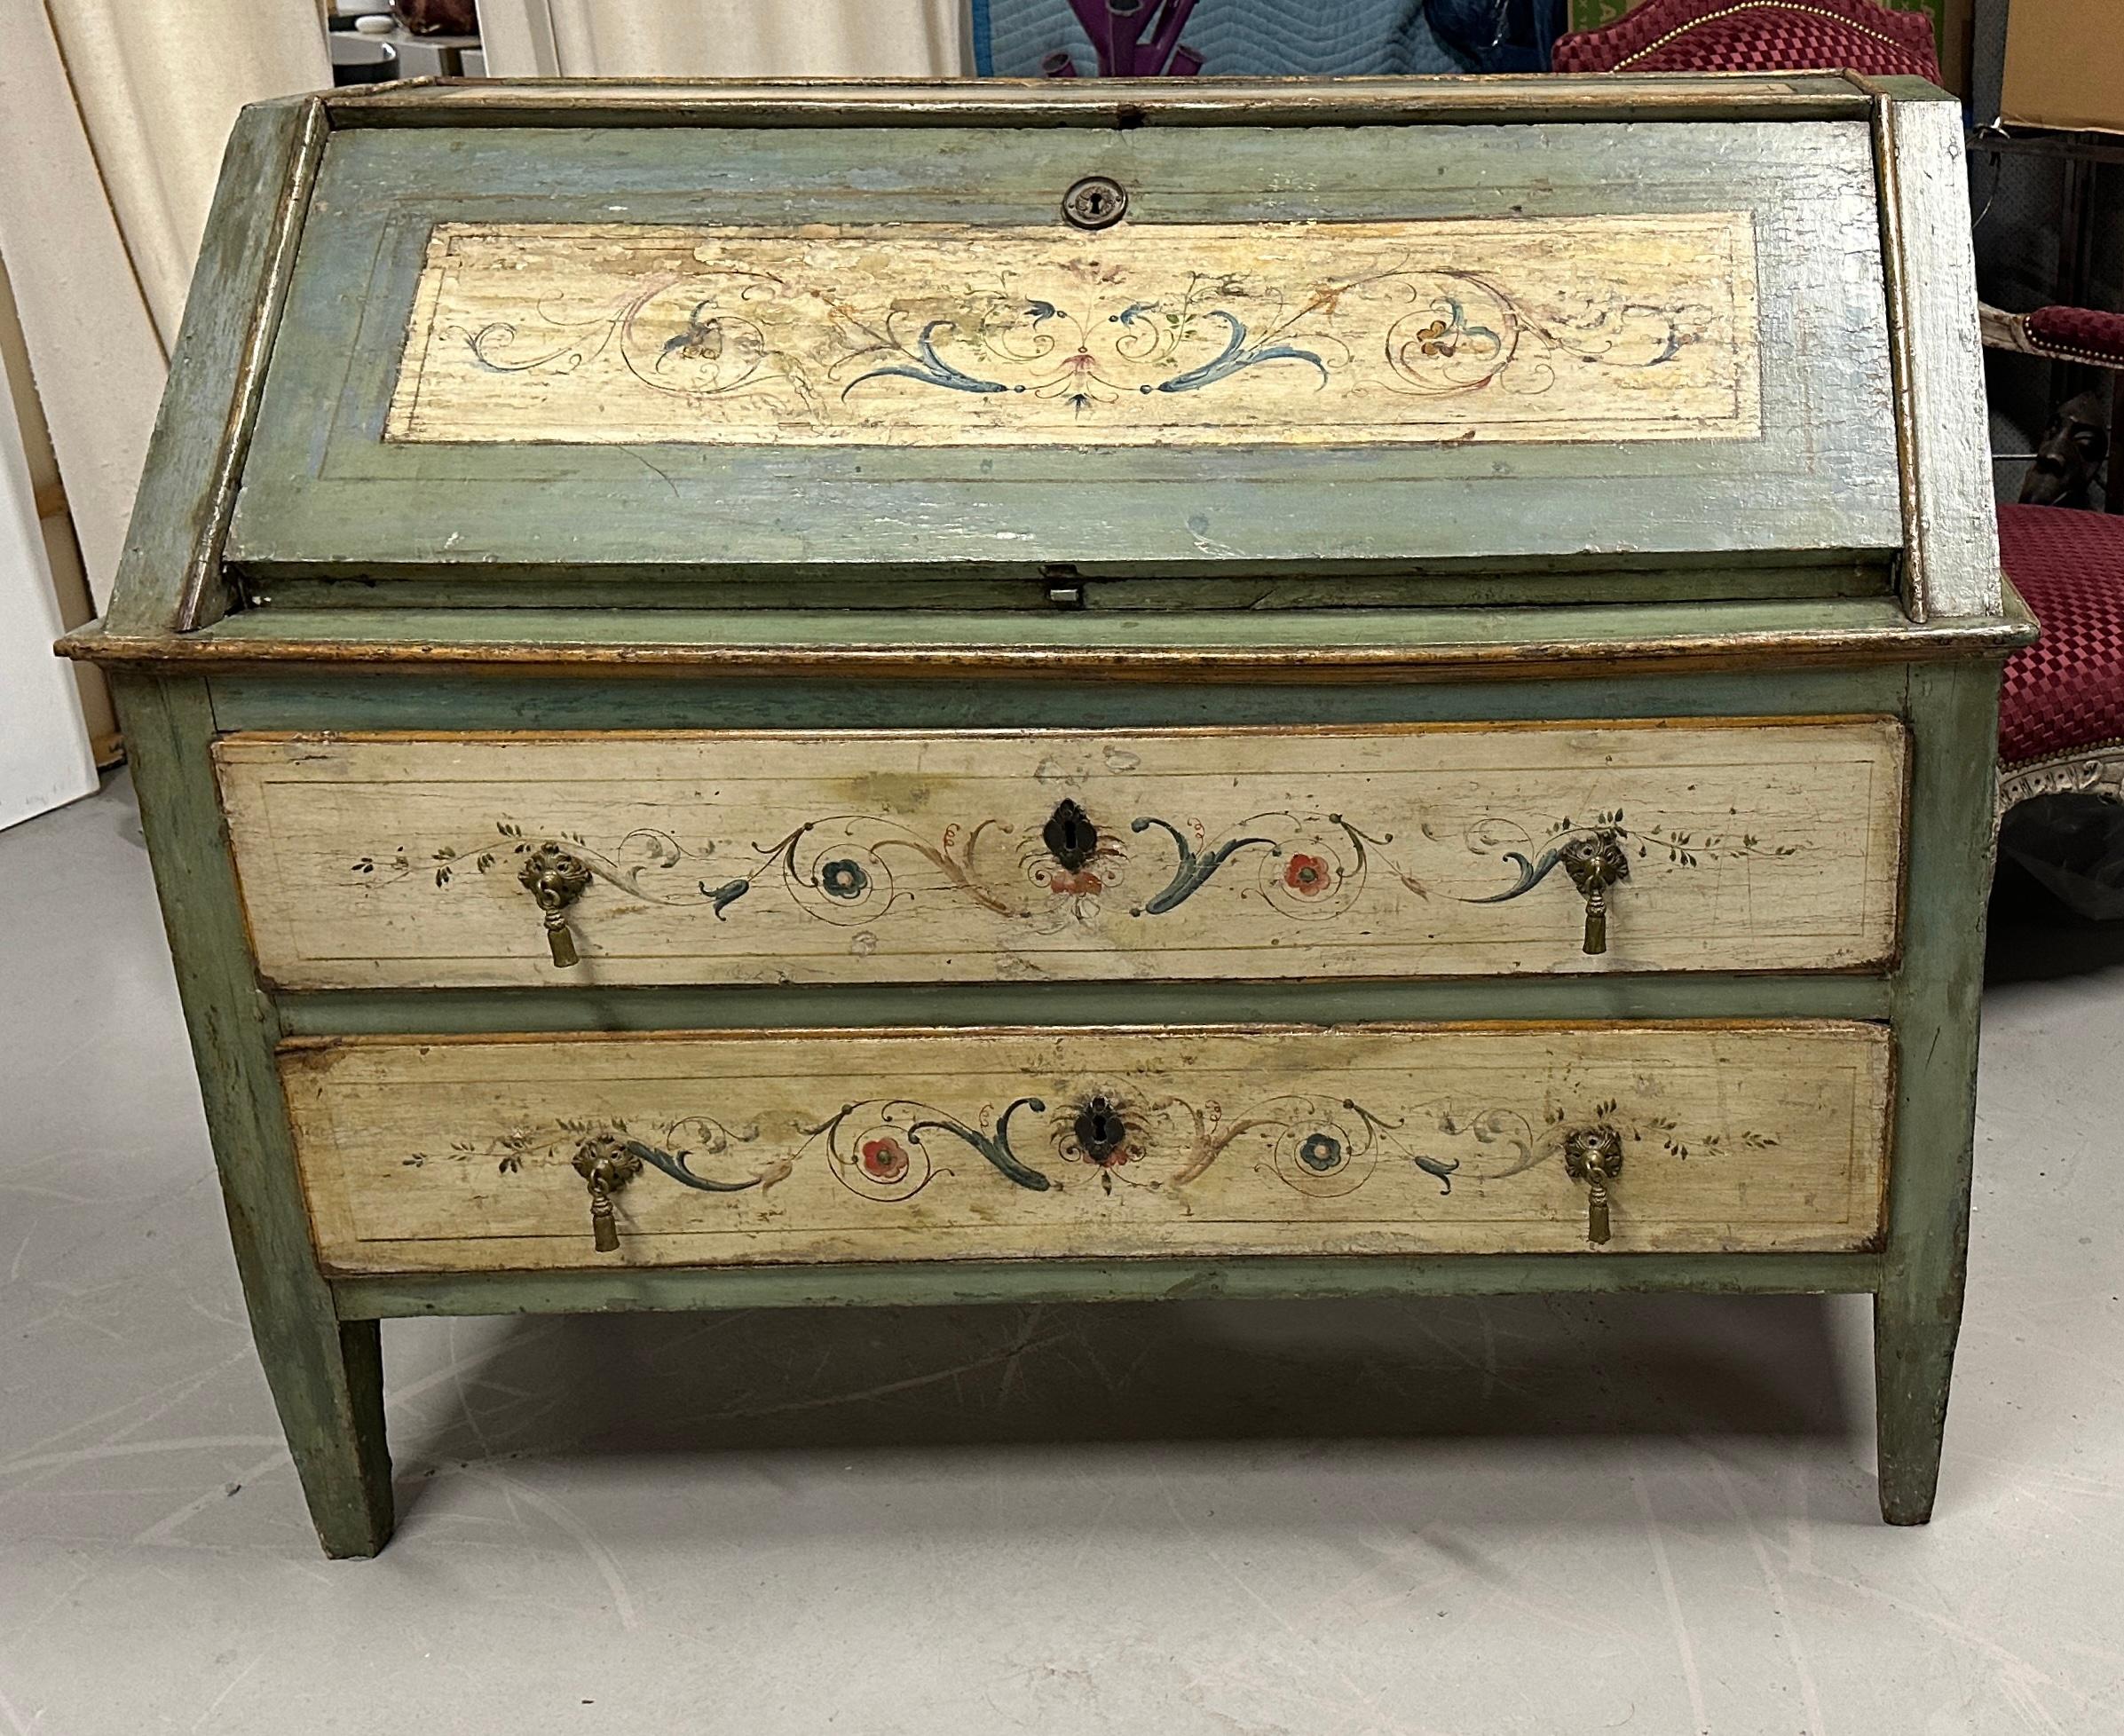 A beautiful 18th century painted northern Italian slant front desk. Wonderful aged patina. It features two large drawers underneath and a slant front top. The slanted front opens to reveal a writing surface and 4 drawers with a central open